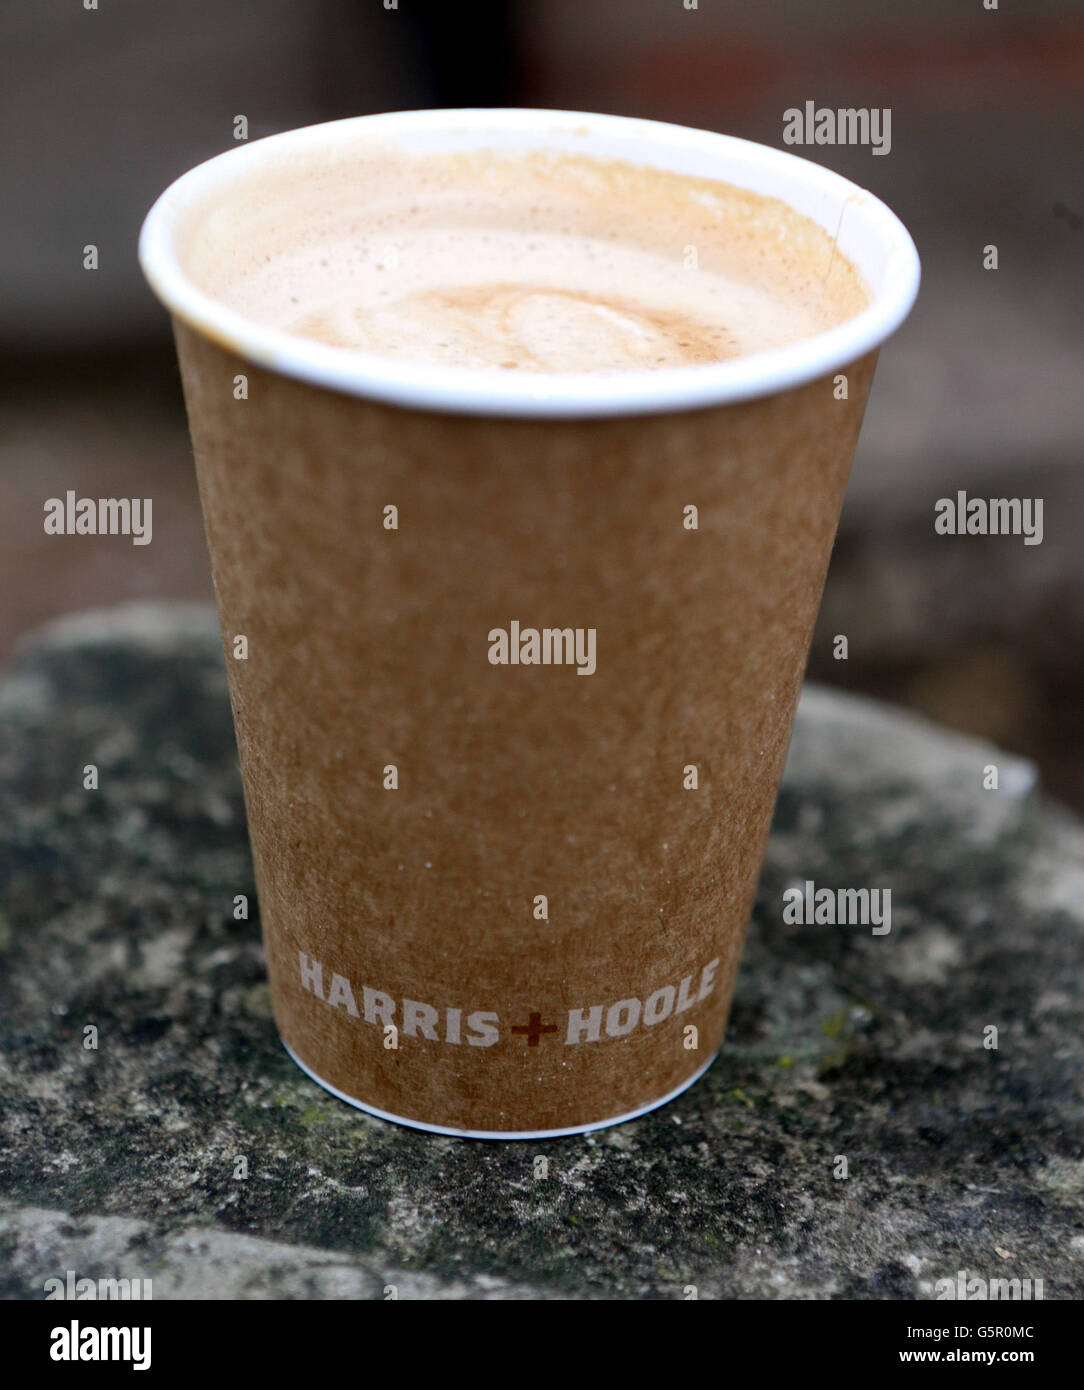 A cup of coffee from the Harris and Hoole coffee shop in Walton-on-Thames, Surrey, which is part owned by Tesco, as Tesco revealed its best UK sales growth in three years today as the chain's drive to reverse falling profits gathered pace over Christmas. Stock Photo